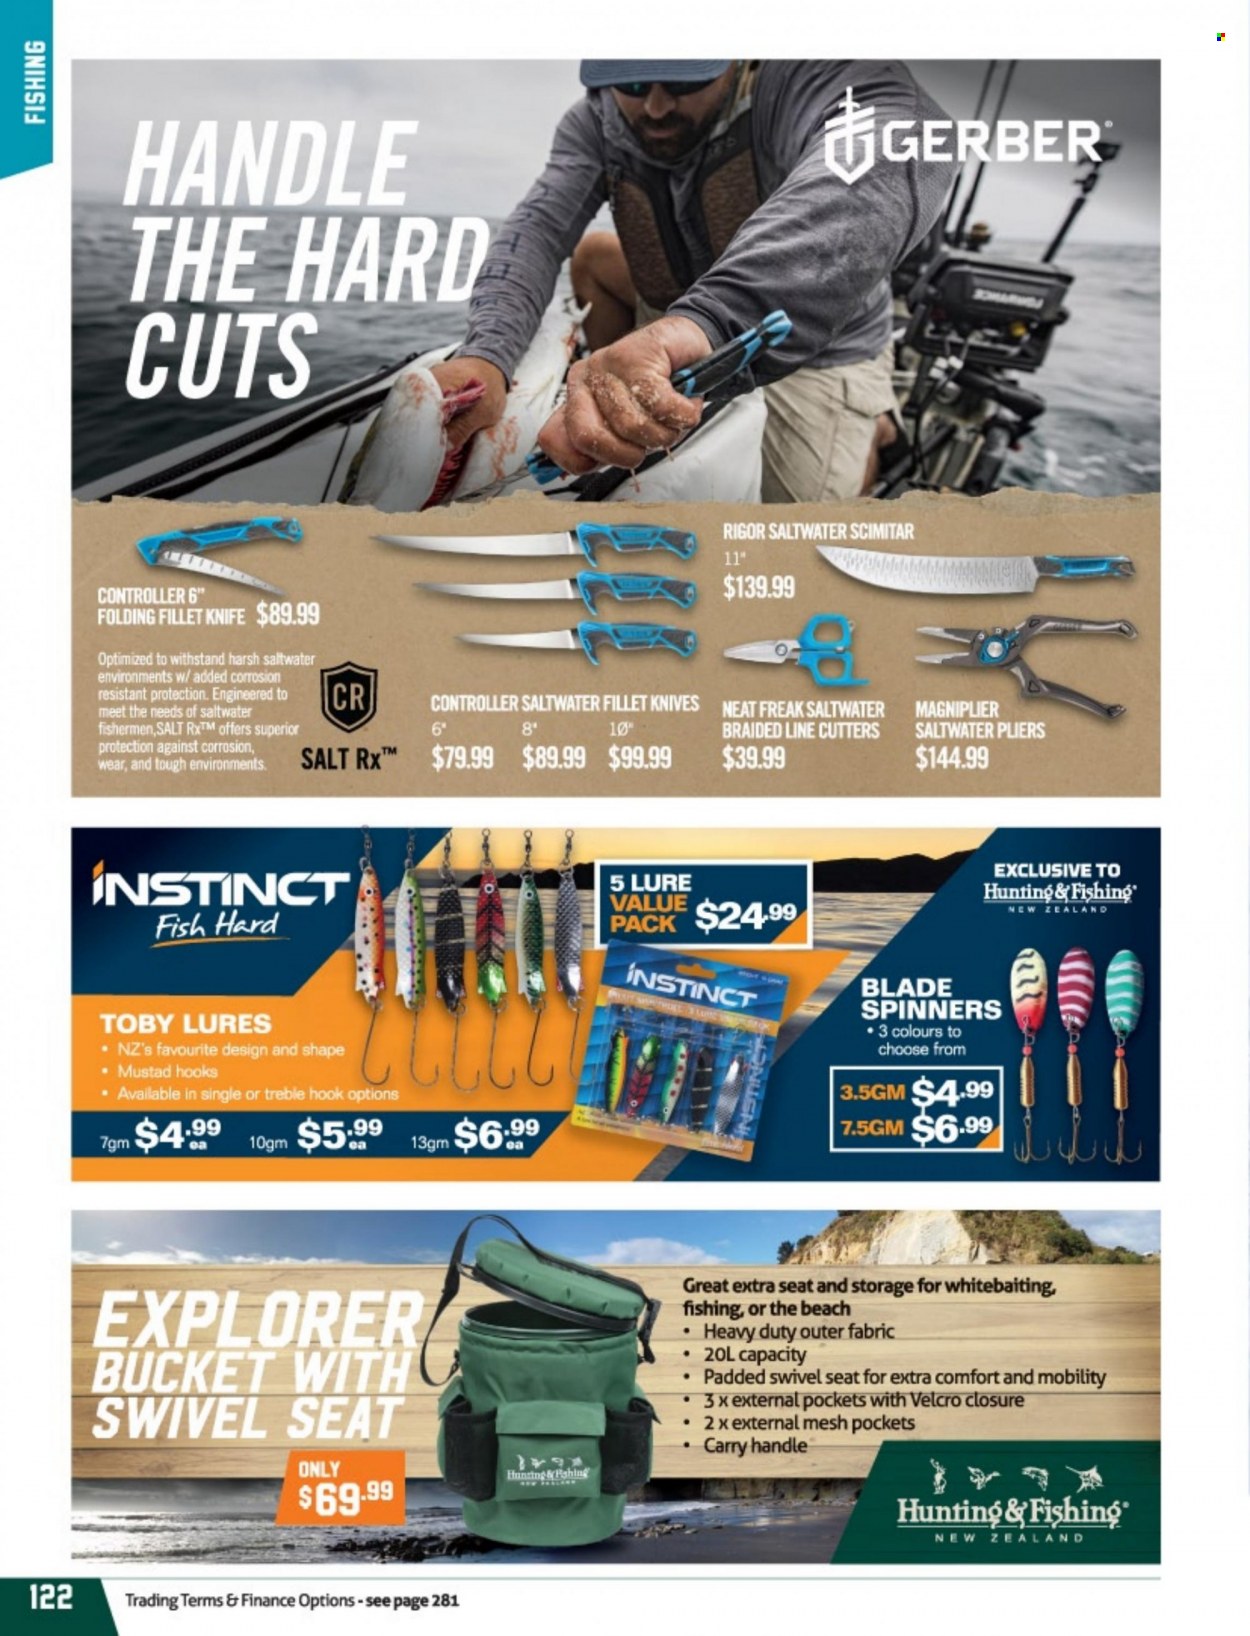 thumbnail - Hunting & Fishing mailer - Sales products - knife. Page 122.